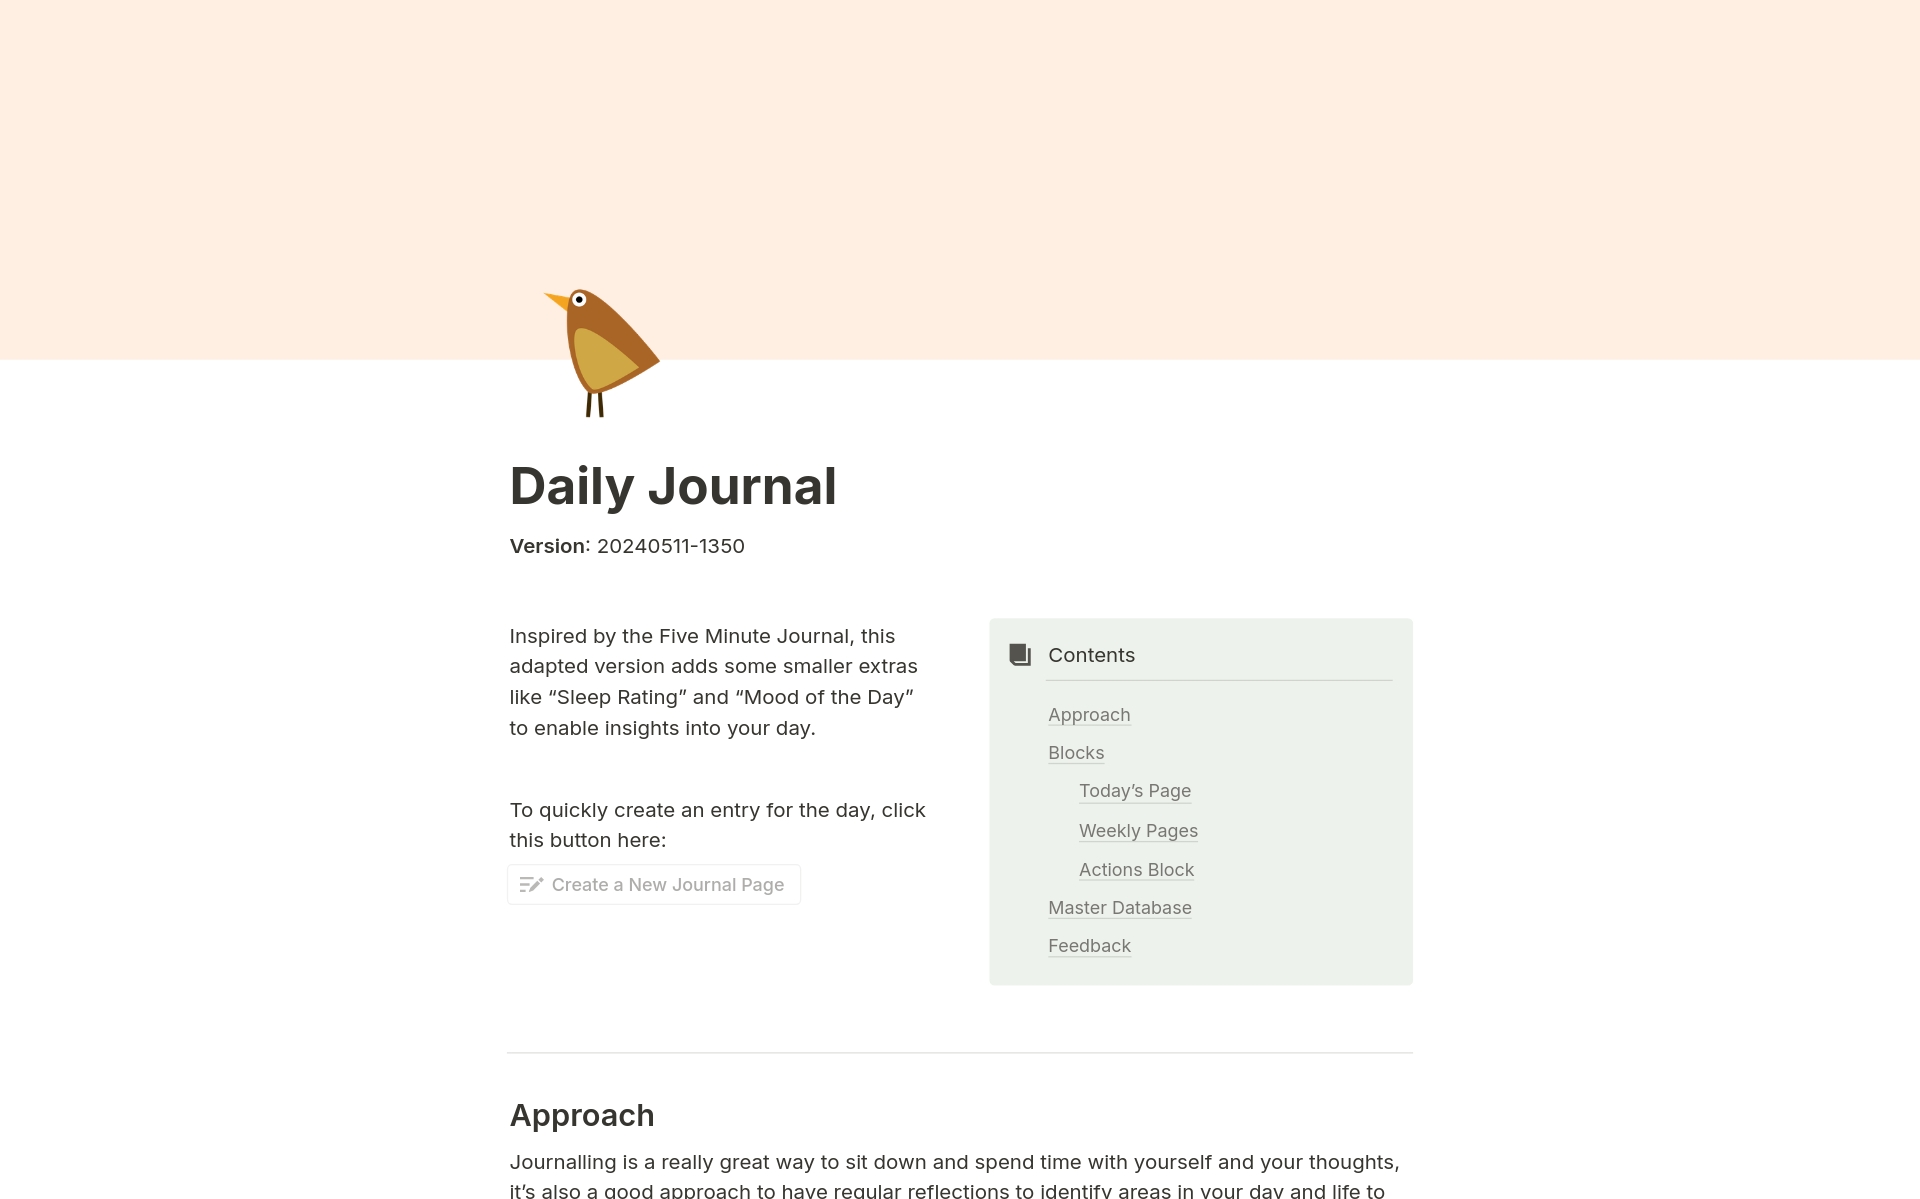 Inspired by the Five Minute Journal, this adapted version adds some smaller extras like “Sleep Rating” and “Mood of the Day” to enable insights into your day.